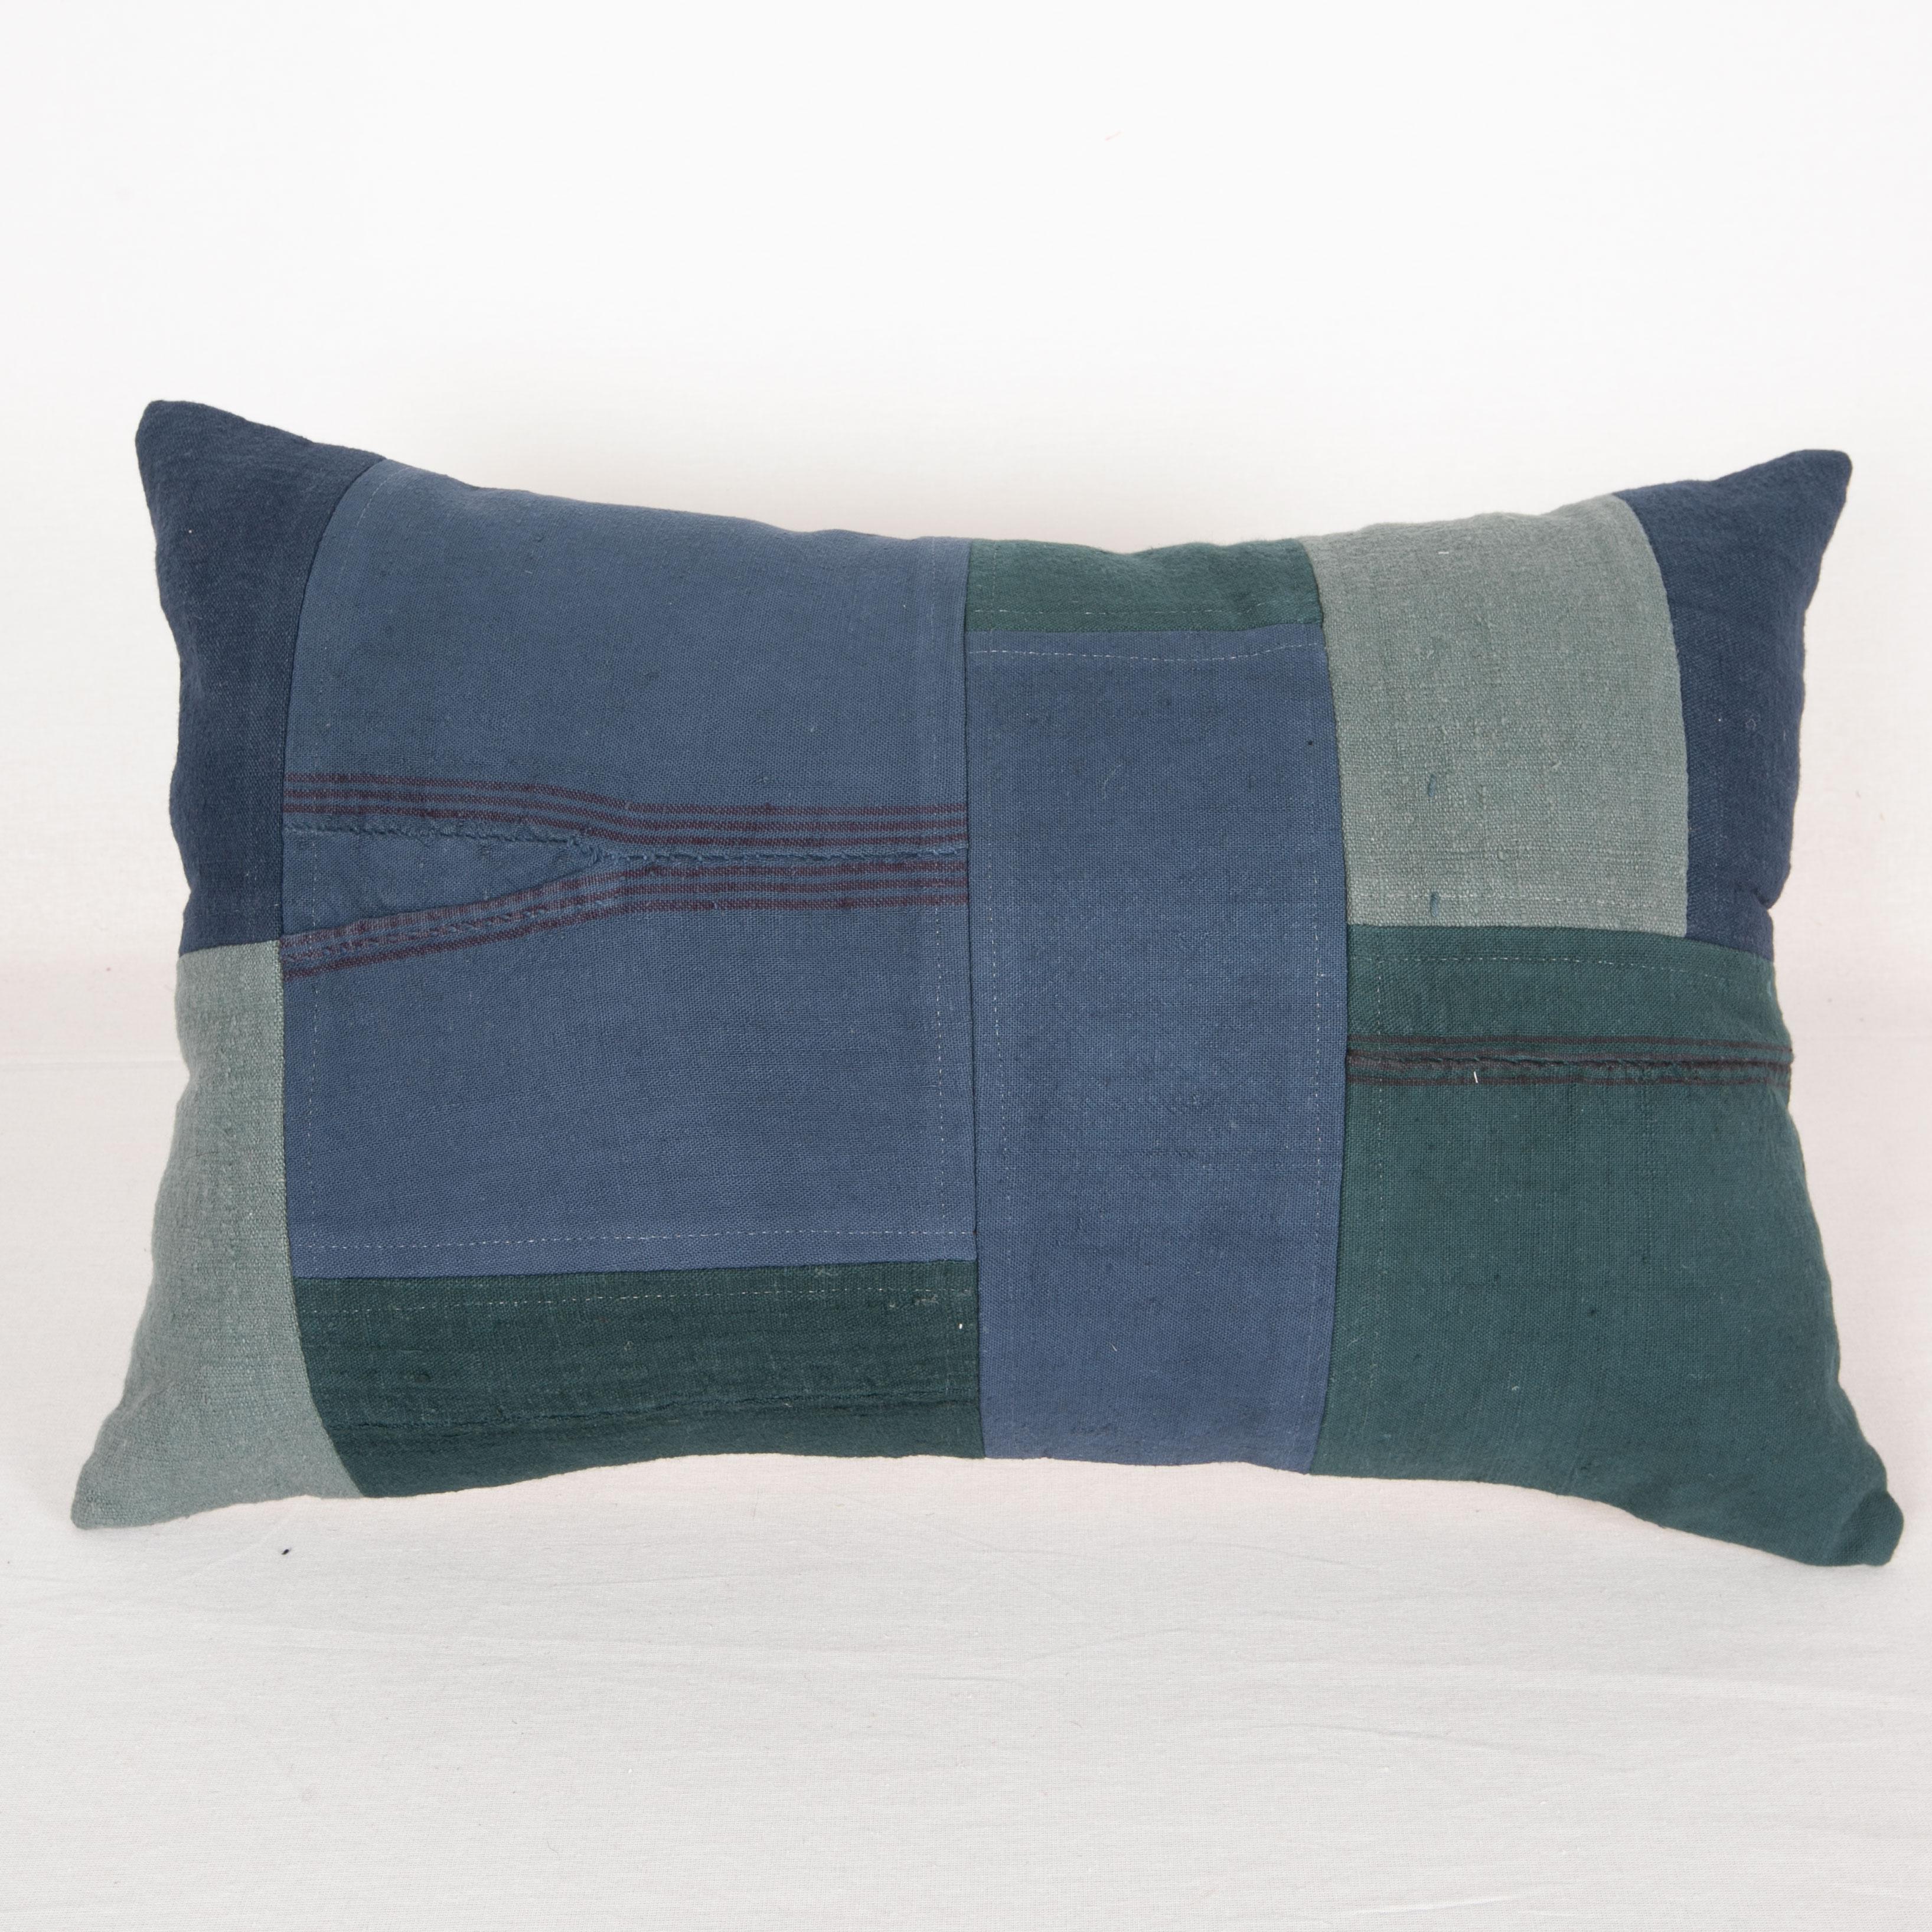 this pillow case is made from vintage and old recycled cotton textiles from Western Anatolia.
It does not come with an insert.
Linen in the back.
Dry Cleaning is recommended.
  